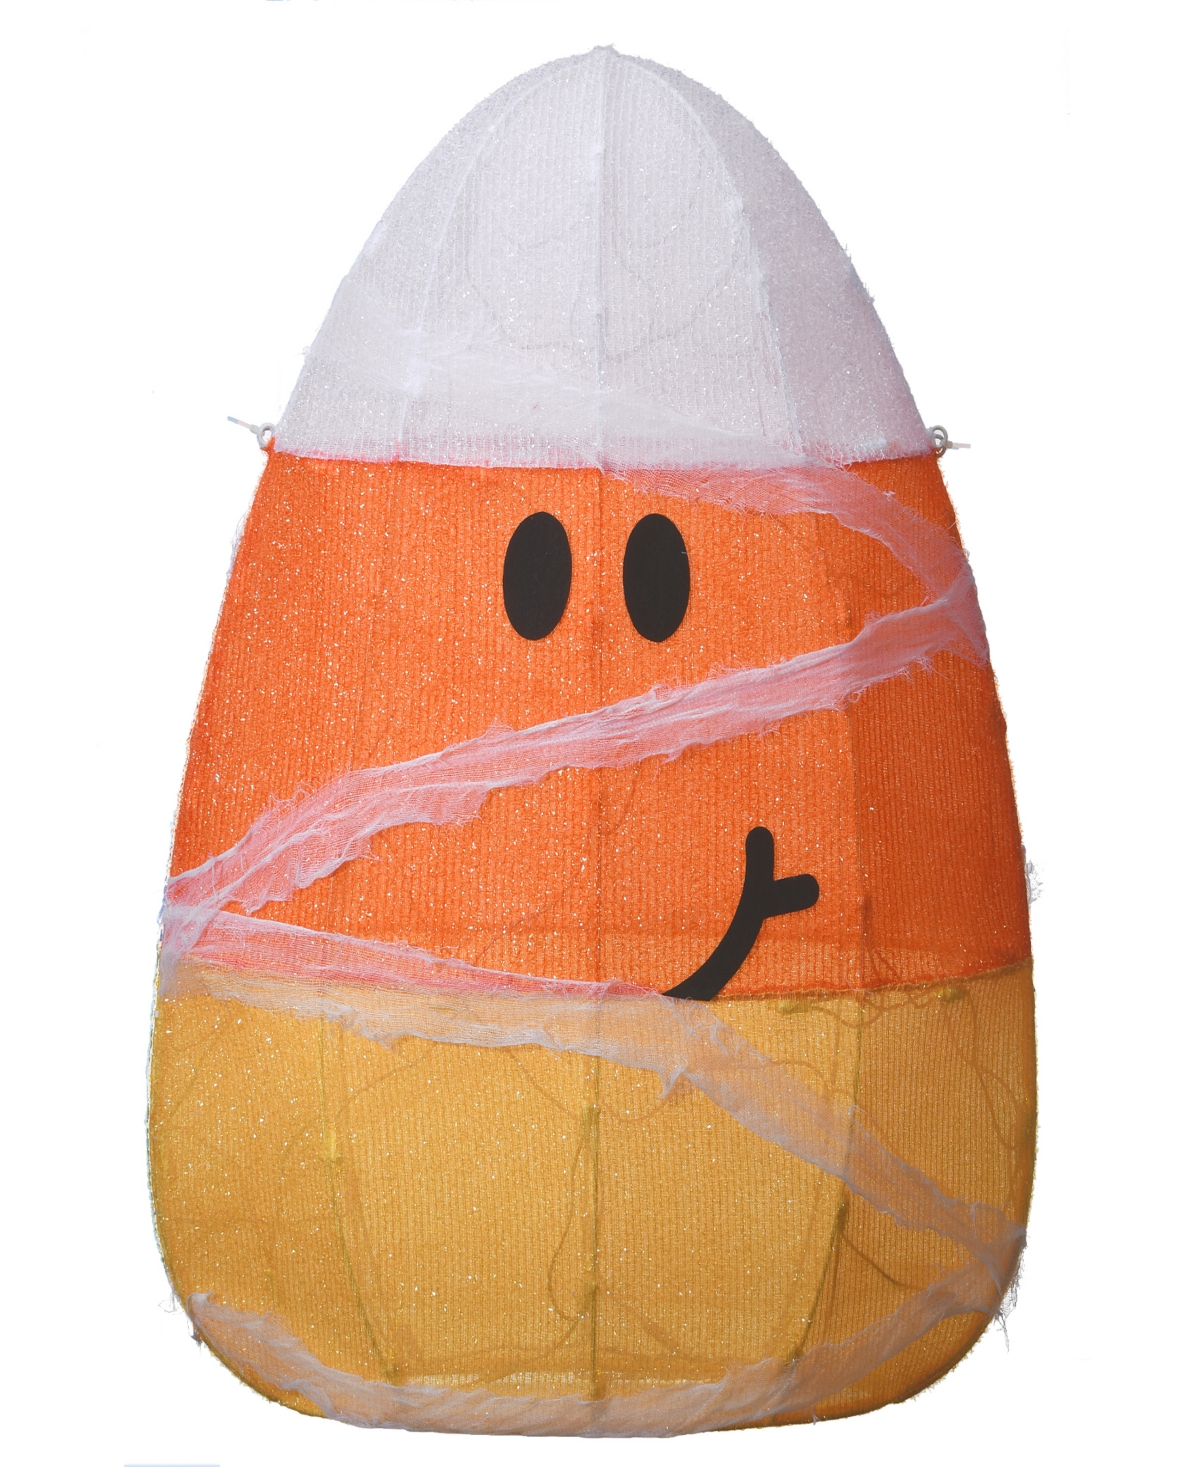 28" Pre-Lit Candy Corn Mummy Outdoor Decoration, Led Lights, Halloween Collection - Orange